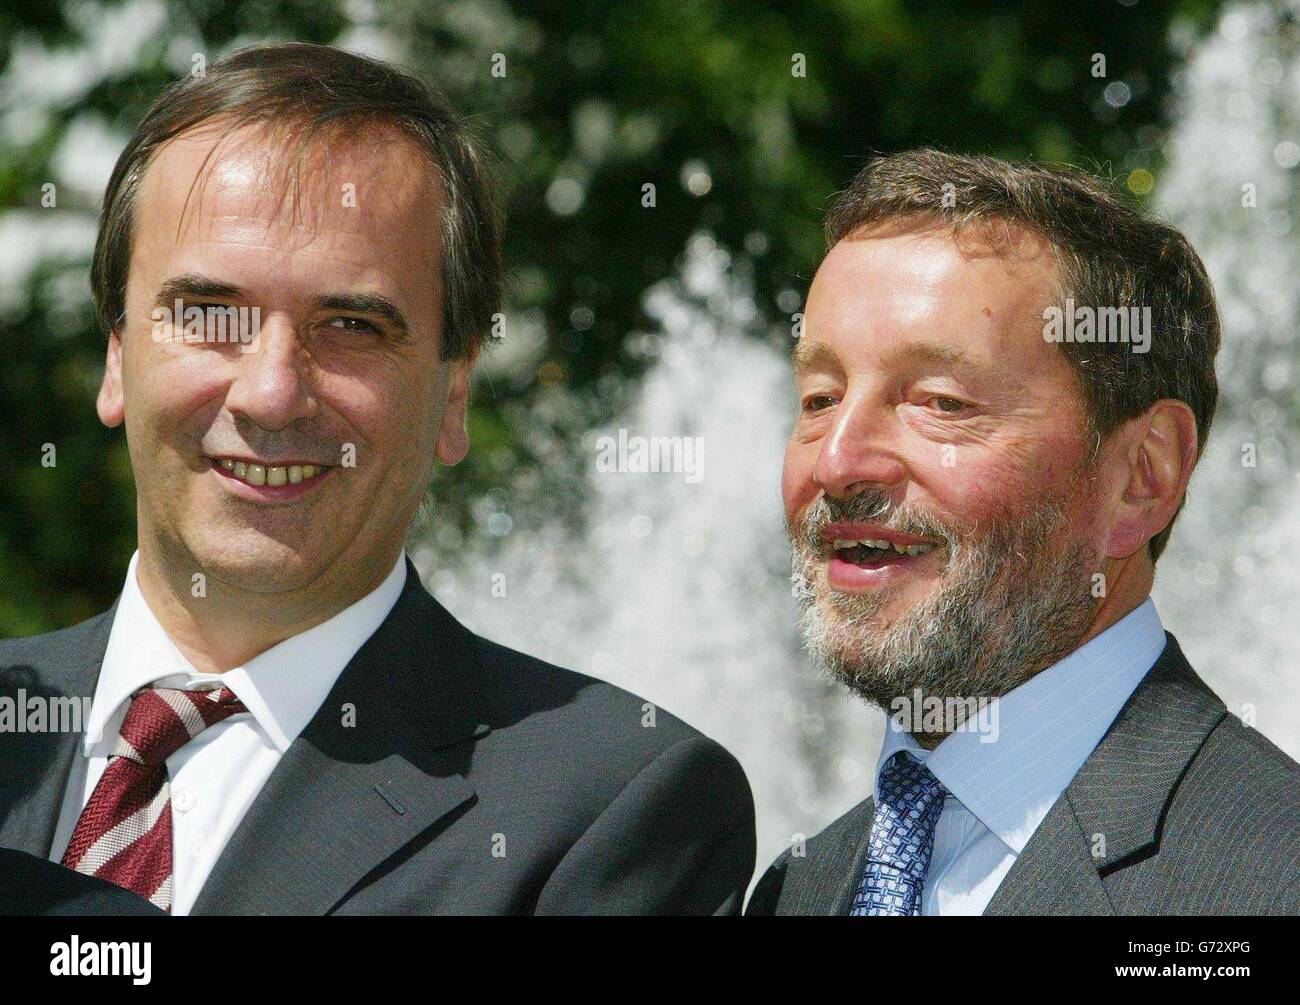 Home Secretary David Blunkett (right) stands with Spanish Minister of the Interior Jose Antonio Alonso Suarez at Sheffield City Square, prior to a meeting of their counterparts from France, Germany and Italy in a bid to increase cross-border cooperation. The two-day informal summit is also looking at methods of tracking the flow of cash that ends up financing al Qaida and other groups, and of tackling the use of false papers. Stock Photo